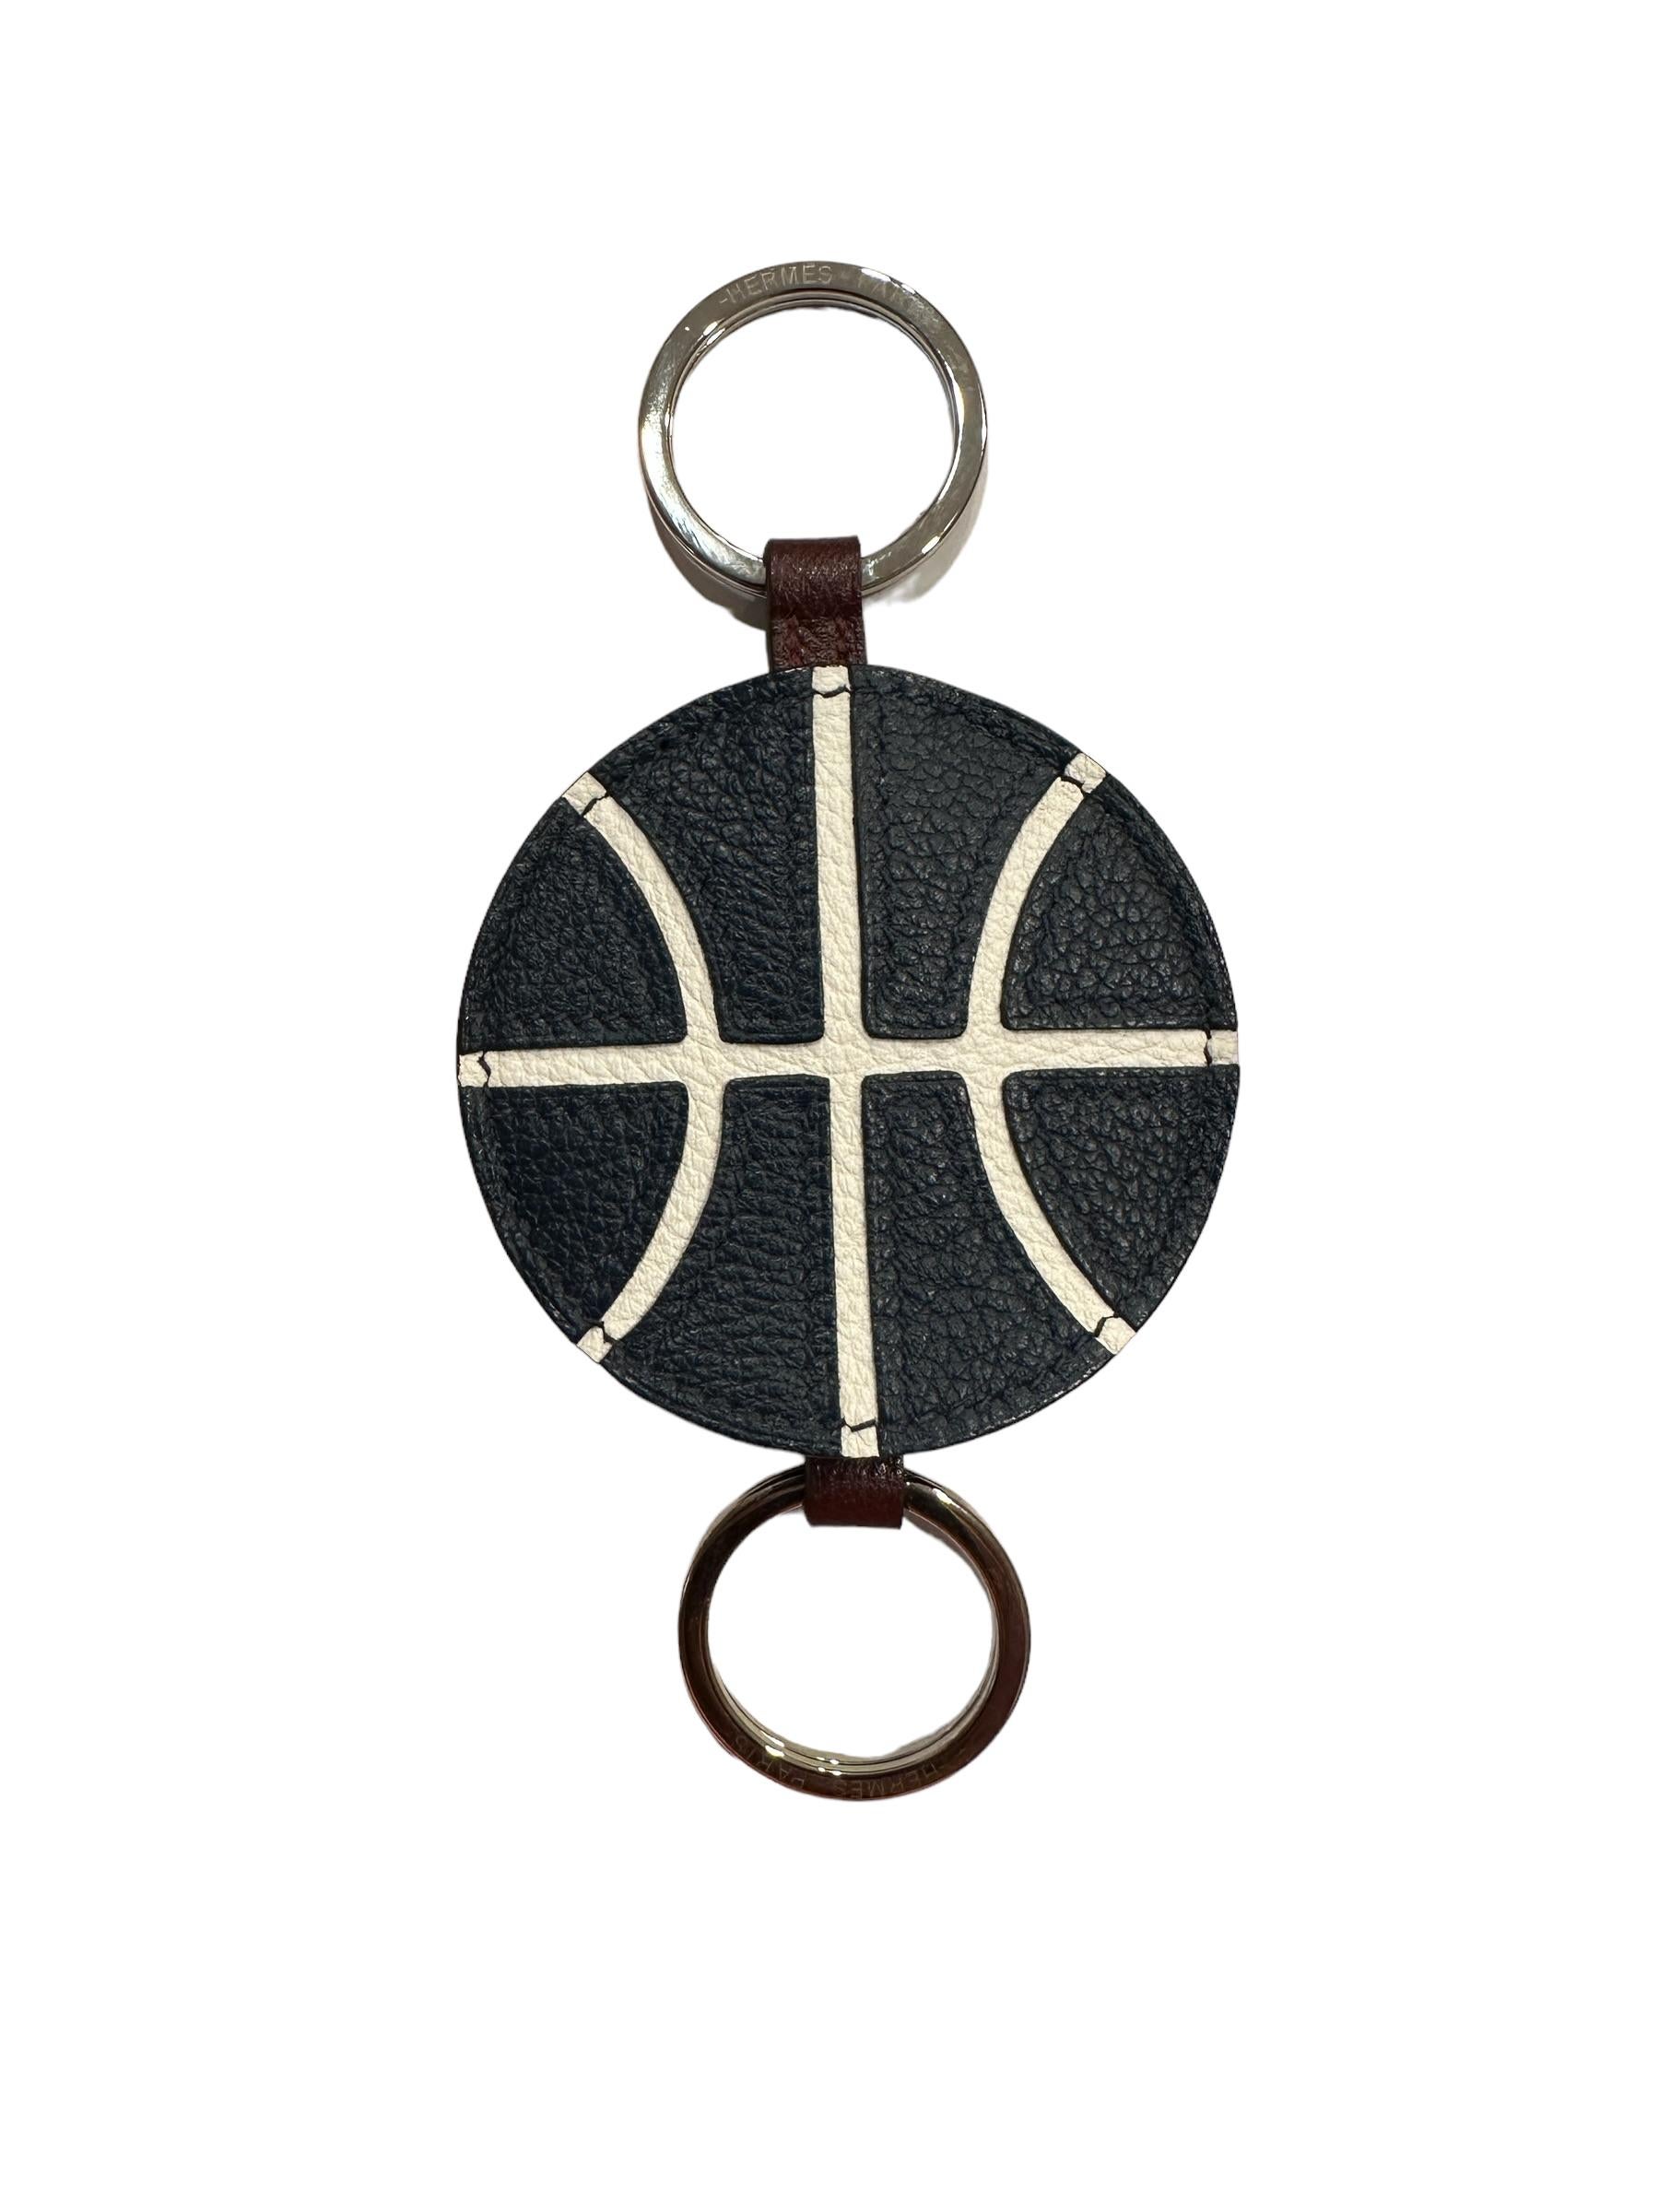 Hermes BASKETBALL KEY RING
Bleu De Malte / Blanc / Bordeaux
Collectors Item
No longer available at Hermes
Limited Edition for that Basketball player in your life!
We Are Bringing This Amazing Key Ring To You 
Double ring

This Key ring is done in